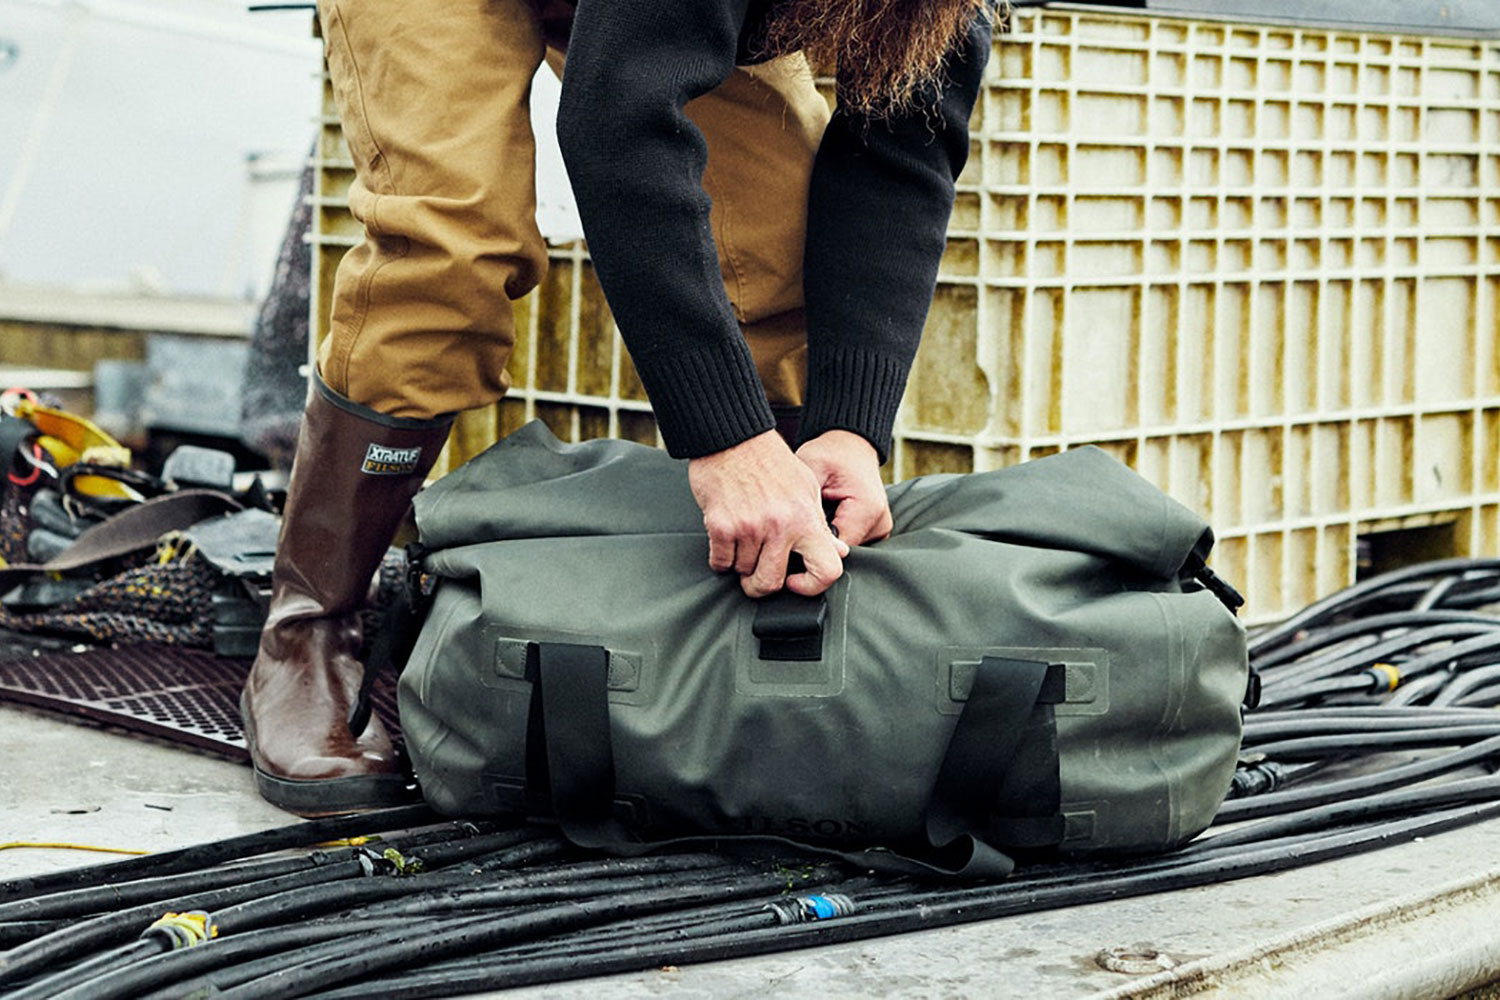 Waterproof luggage bags: Finest ones to take your items safely